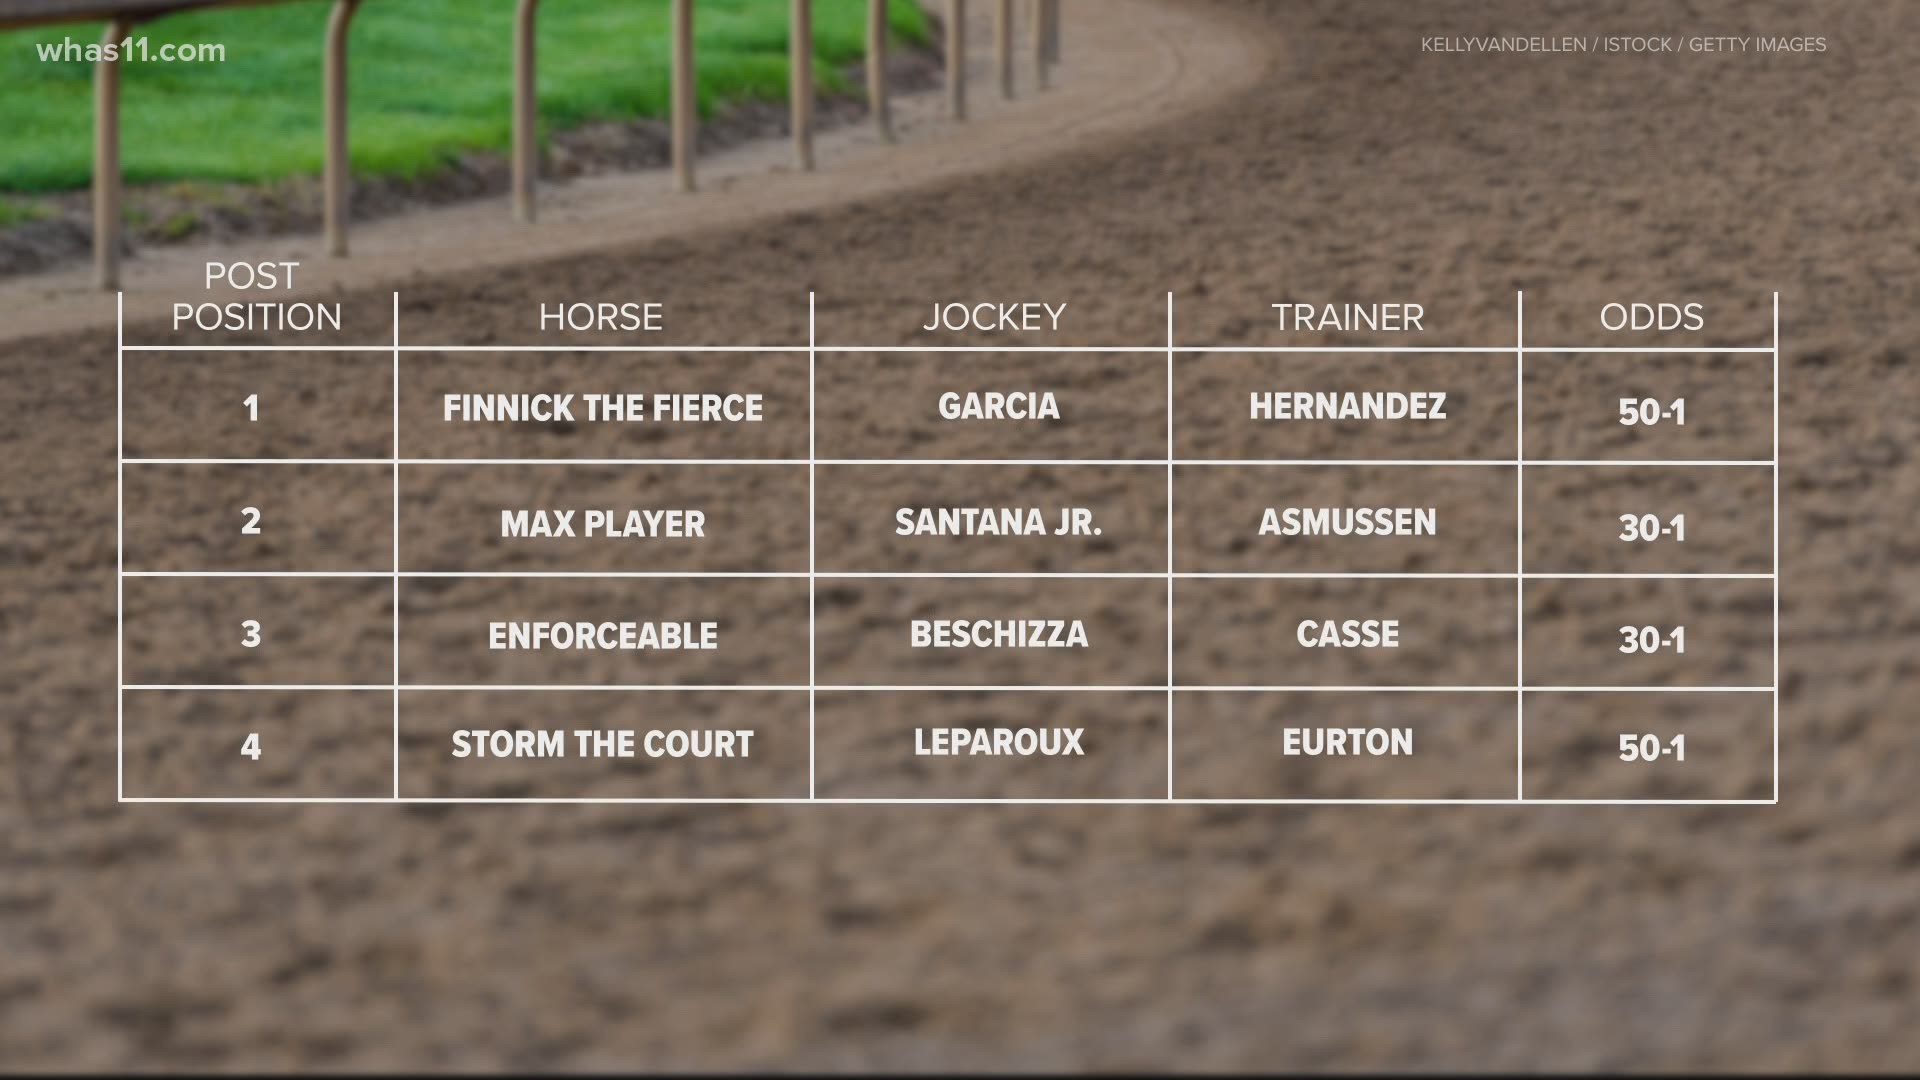 The post positions for the 18 horses running in the 146th Kentucky Derby have been drawn.